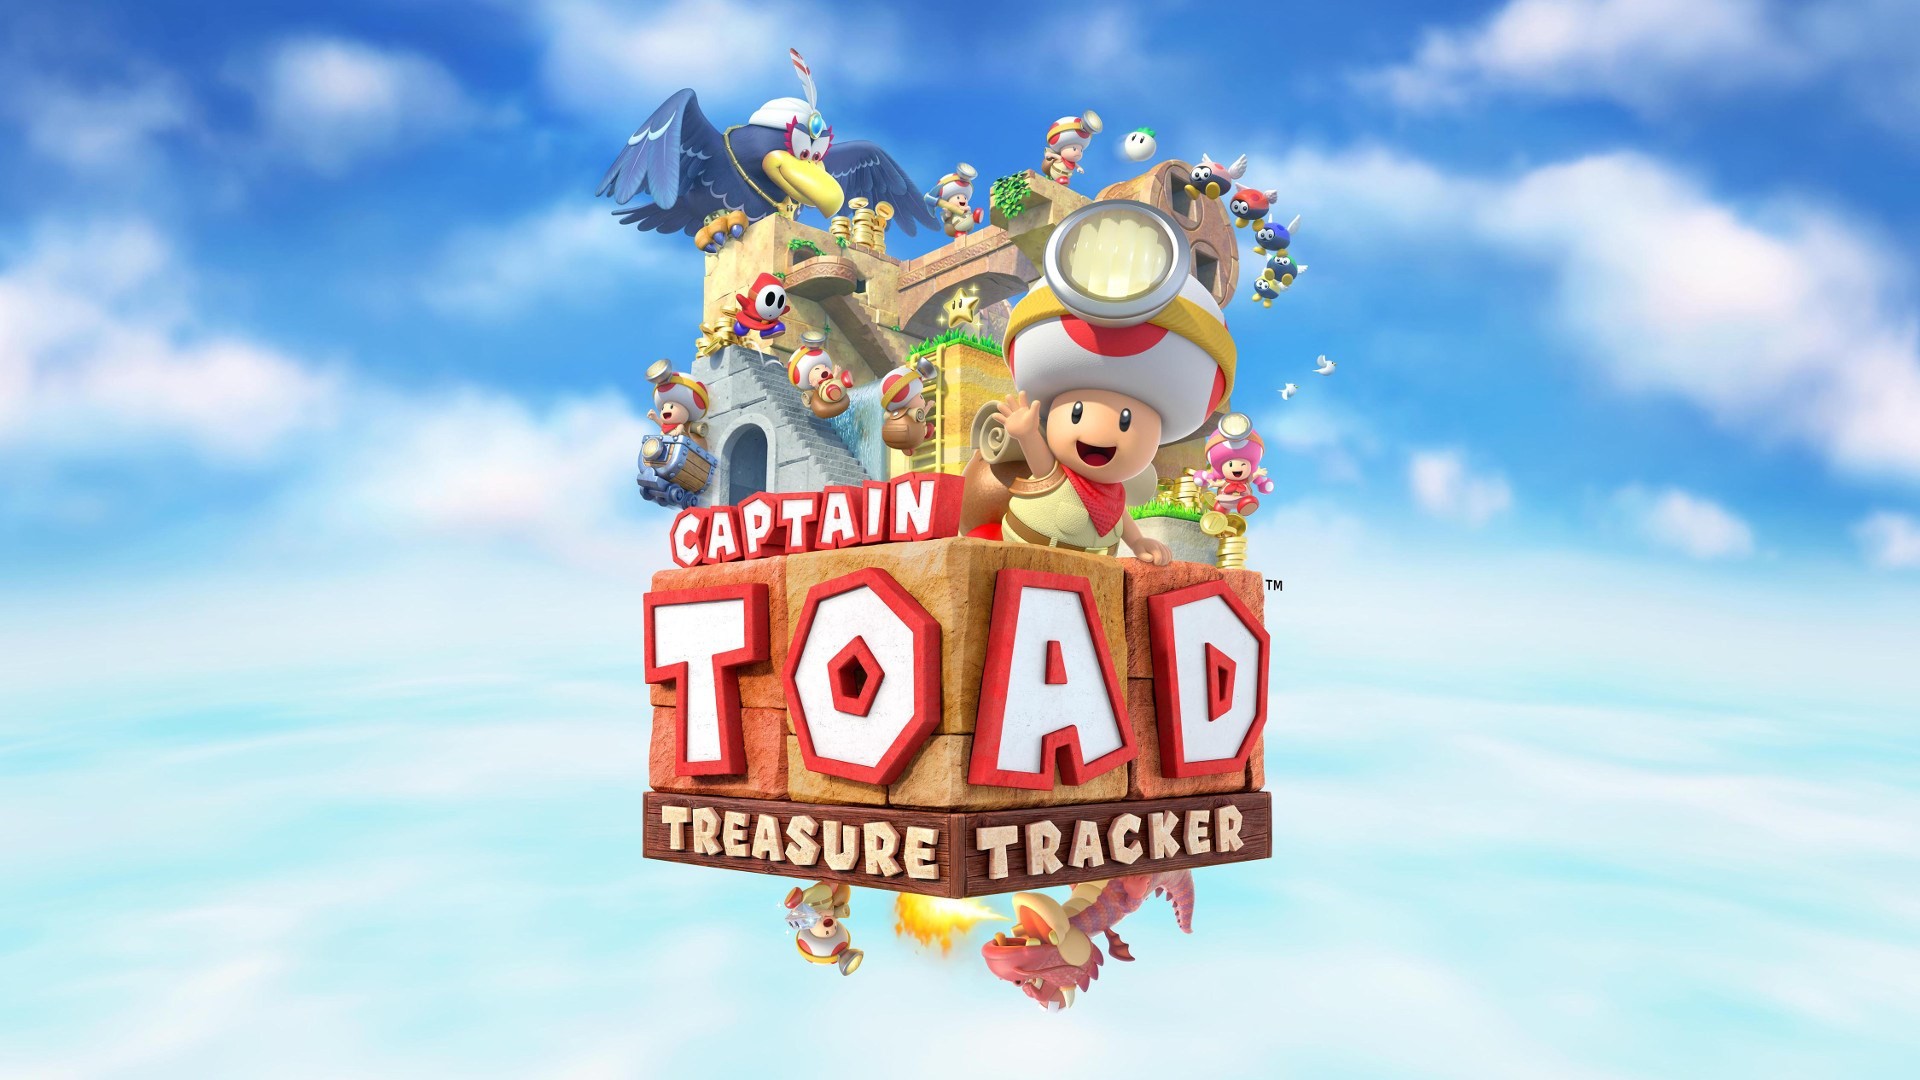 1920x1080 wallpapers free captain toad treasure tracker